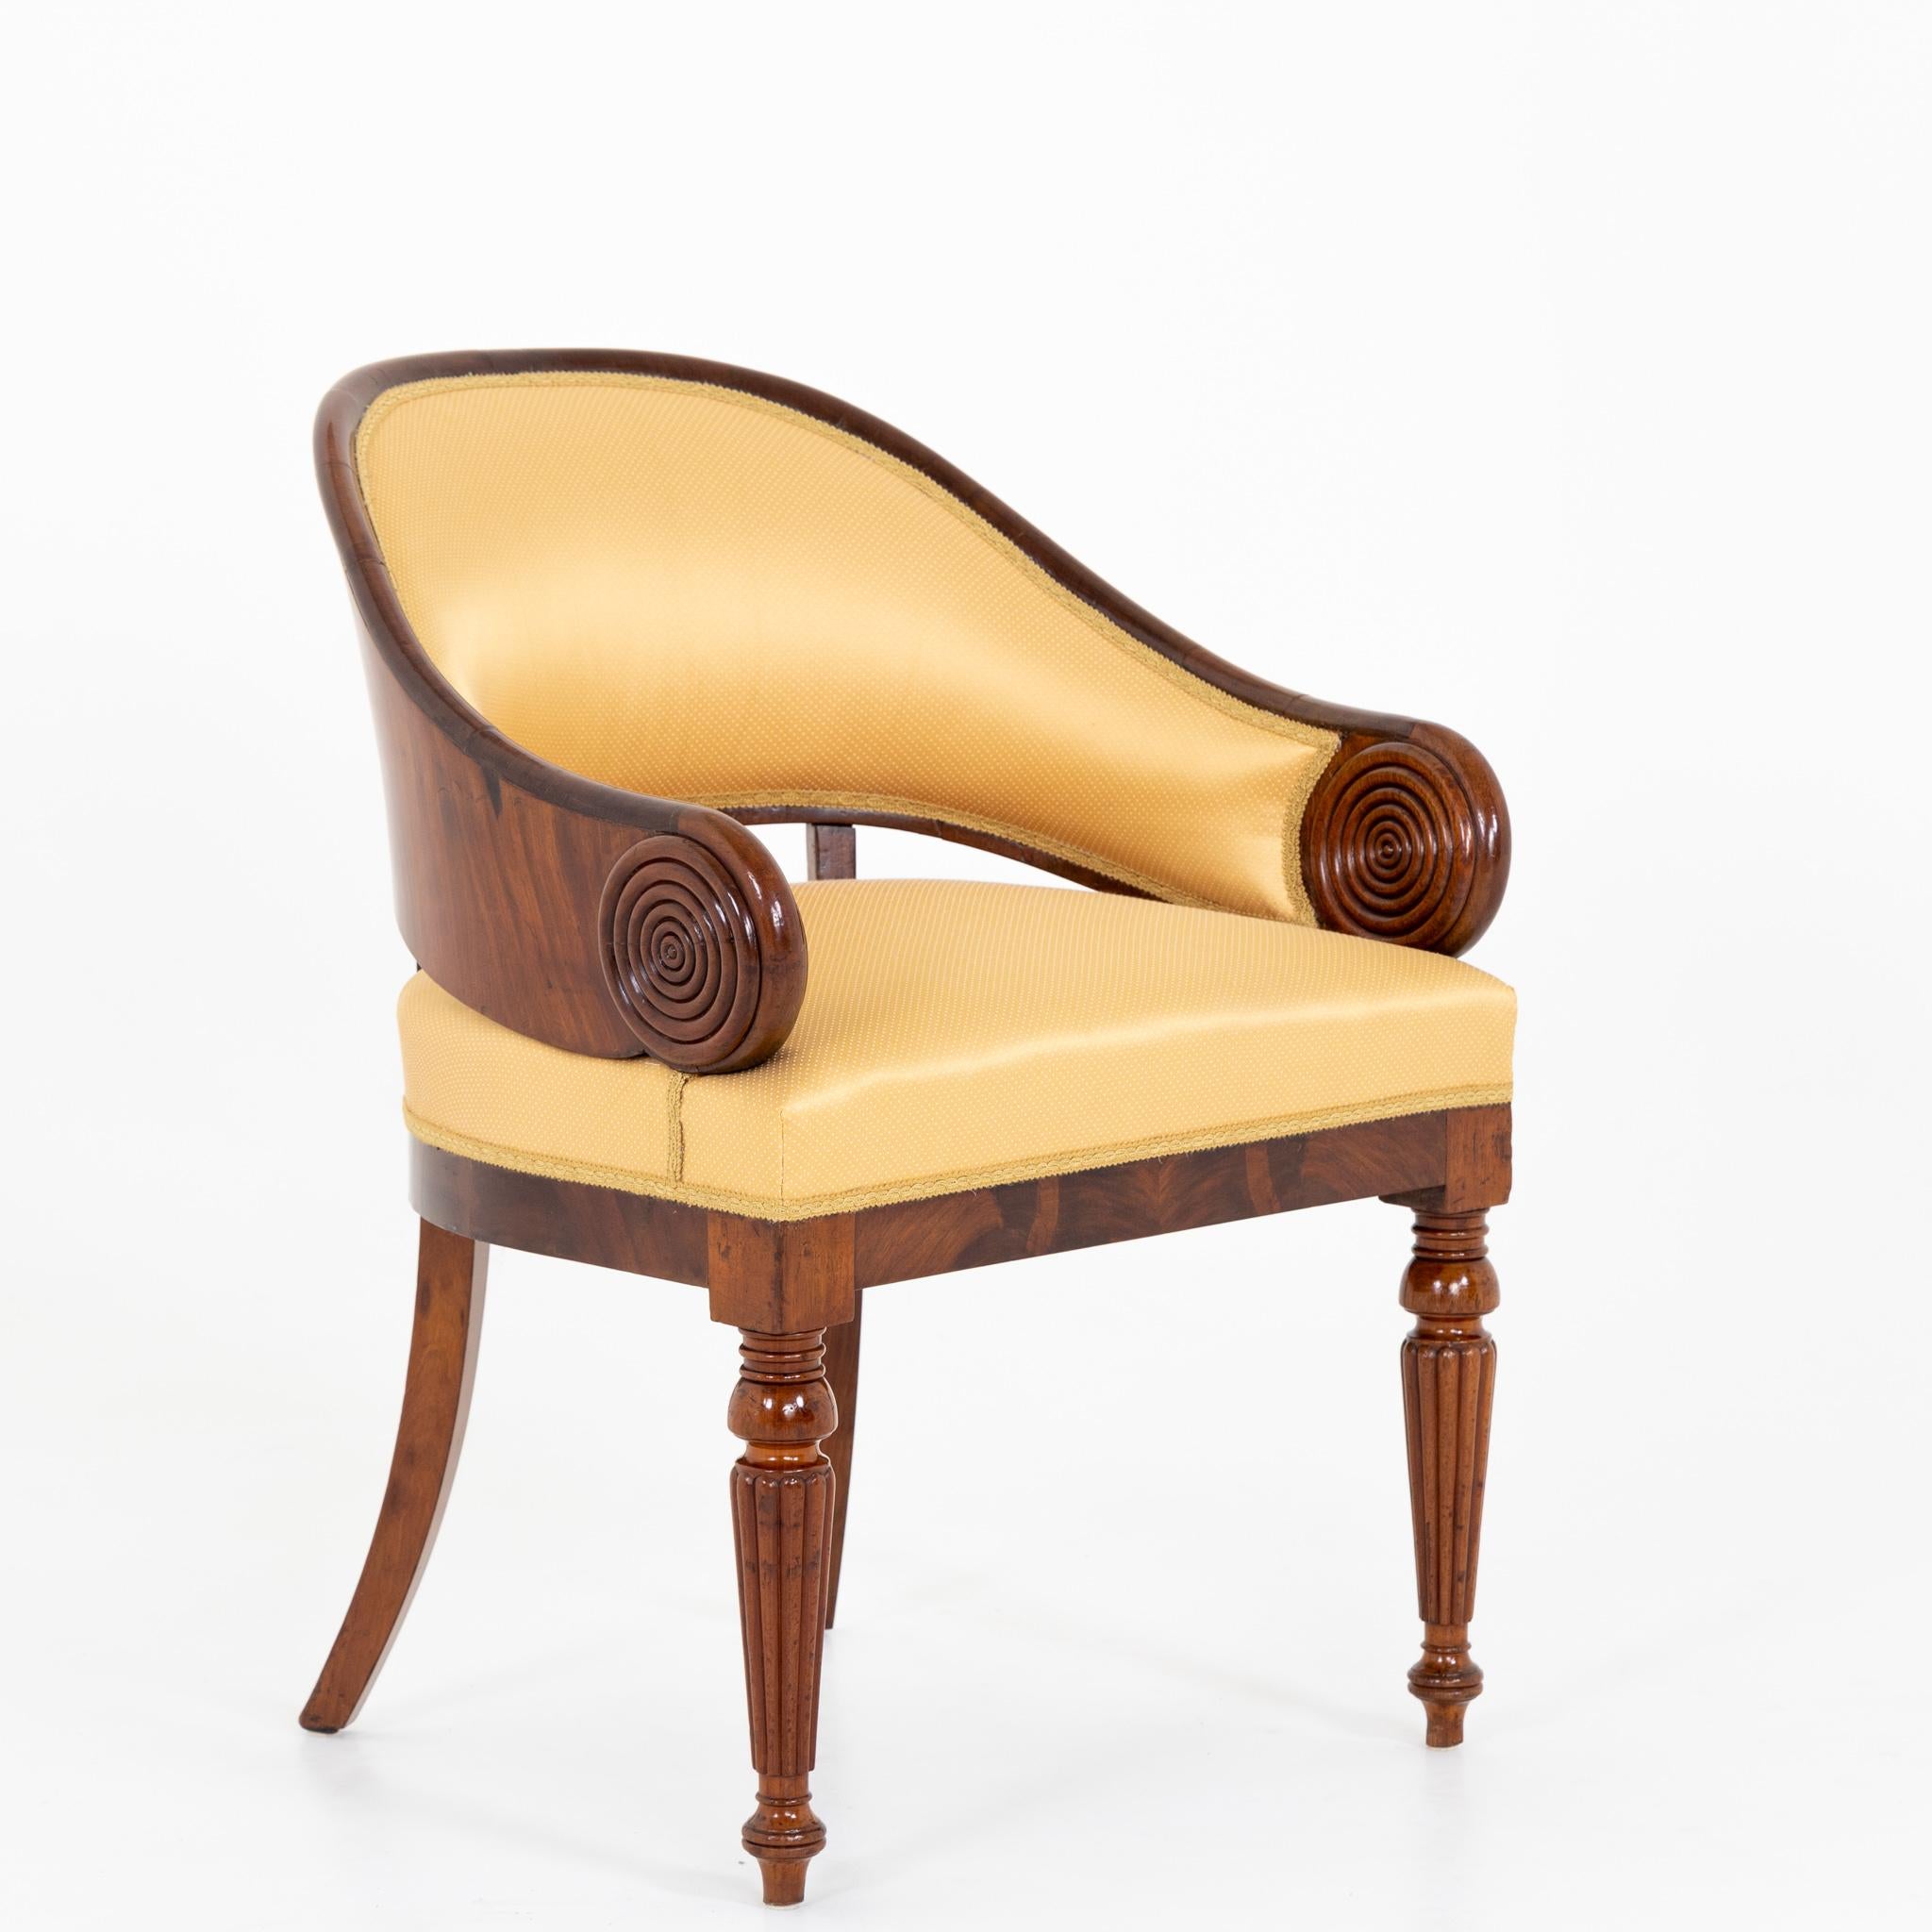 Armchair with rounded back and carved ring-shaped decorations standing on baluster legs. Mahogany, veneered and solid; reupholstered.